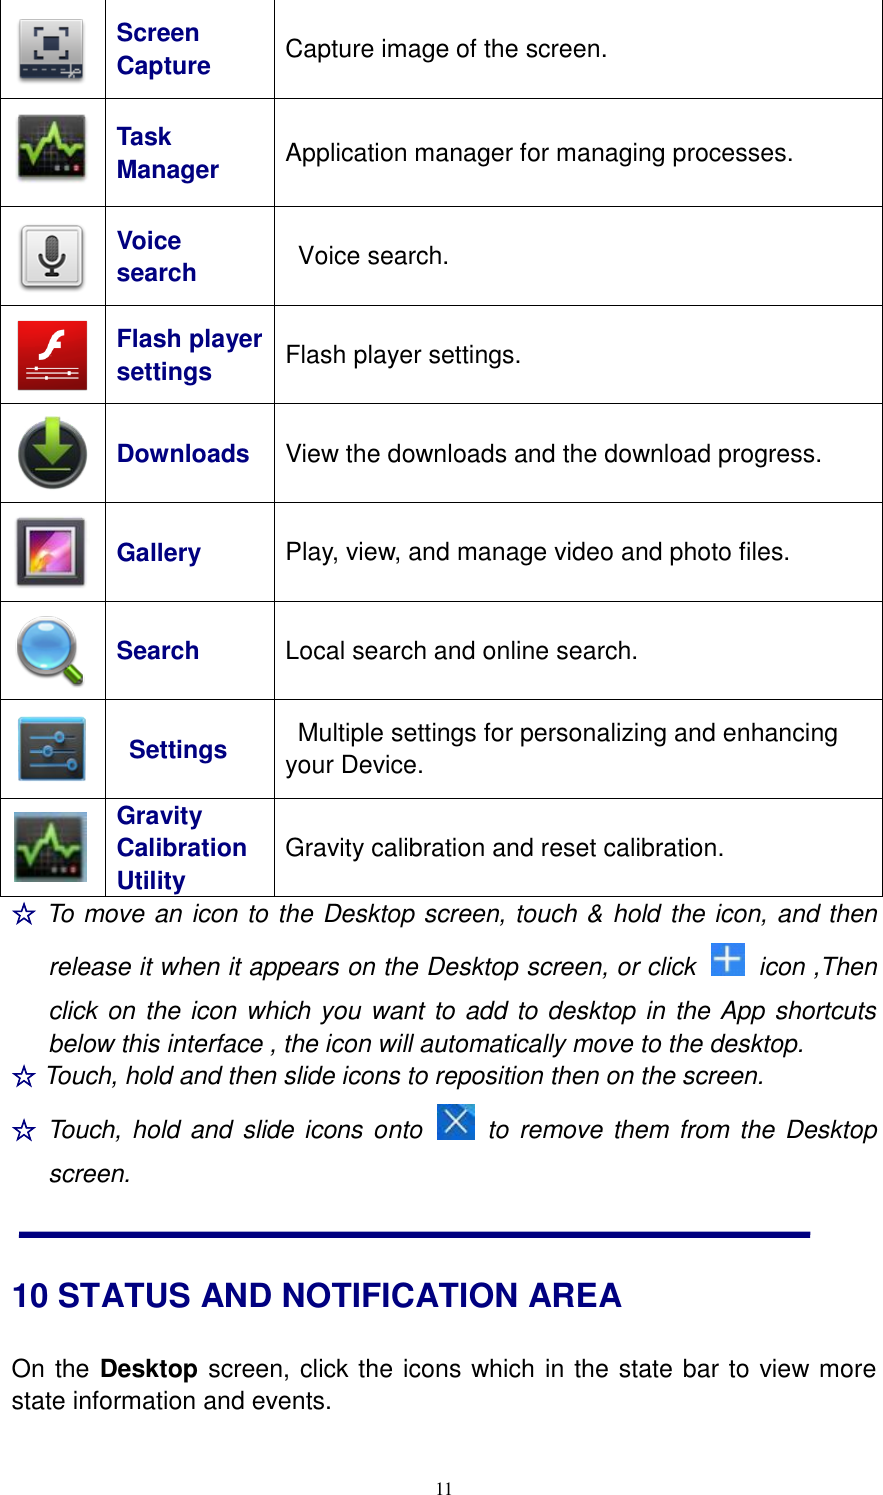  11  Screen   Capture Capture image of the screen.  Task Manager Application manager for managing processes.  Voice search   Voice search.  Flash player settings Flash player settings.  Downloads View the downloads and the download progress.  Gallery Play, view, and manage video and photo files.  Search Local search and online search.      Settings   Multiple settings for personalizing and enhancing your Device.  Gravity Calibration Utility Gravity calibration and reset calibration. ☆ To move an icon to the Desktop screen, touch &amp; hold the icon, and then release it when it appears on the Desktop screen, or click    icon ,Then click on the icon which you want to add to desktop in the App shortcuts below this interface , the icon will automatically move to the desktop. ☆ Touch, hold and then slide icons to reposition then on the screen. ☆ Touch, hold and slide icons onto    to remove them from  the  Desktop screen. 10 STATUS AND NOTIFICATION AREA On the Desktop screen, click the icons which in the state bar to view more state information and events. 